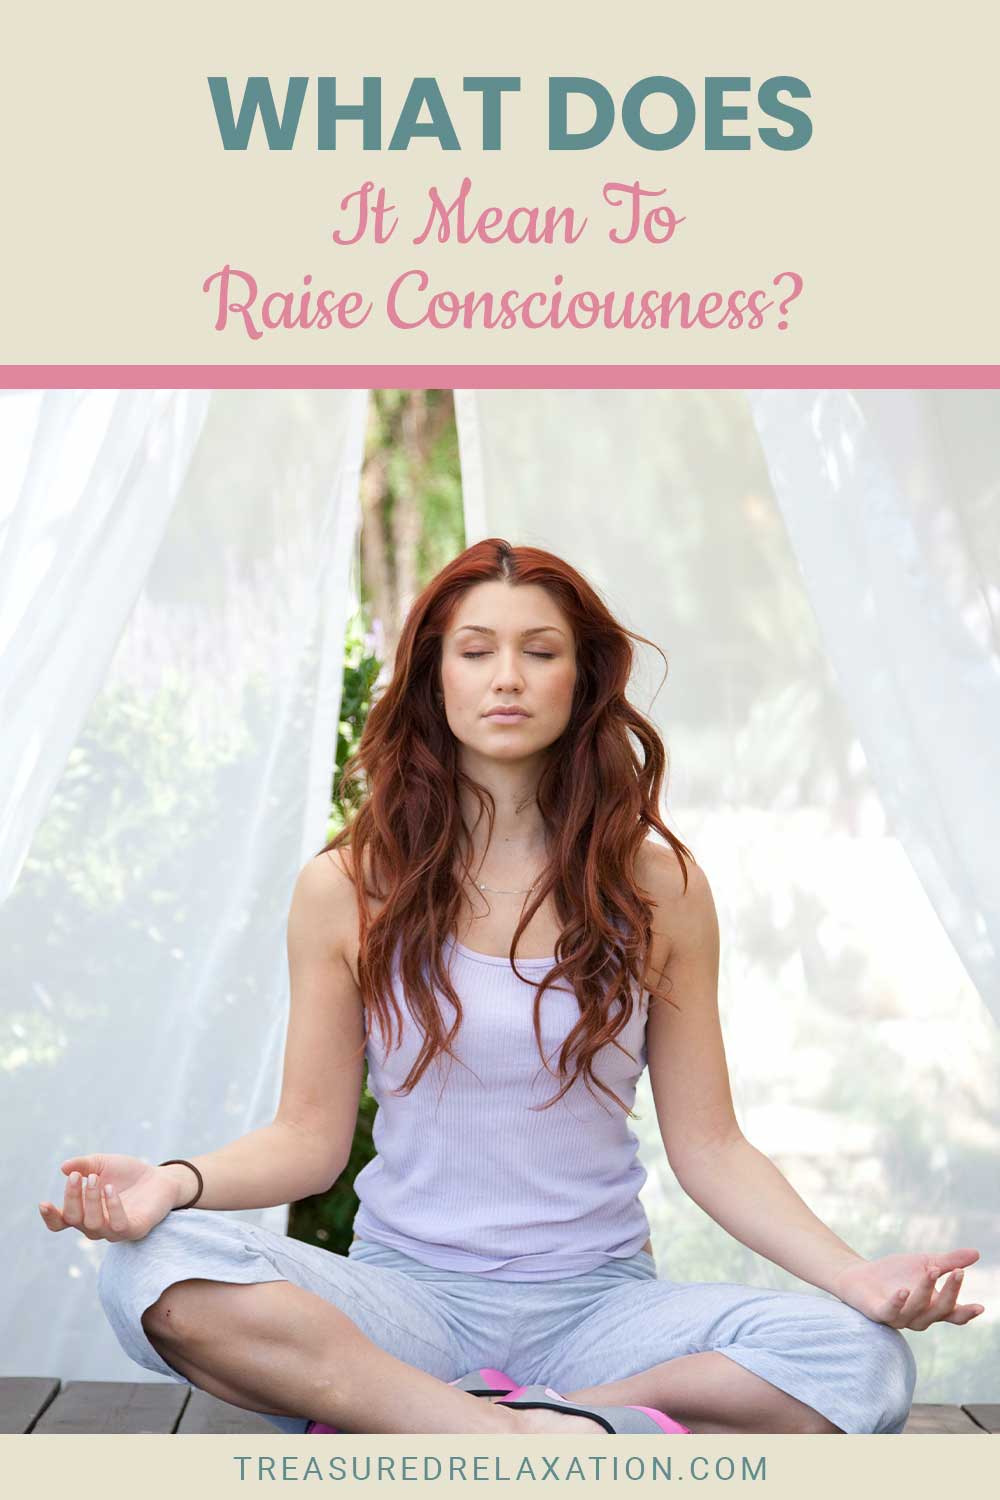 What Does It Mean To Raise Consciousness?